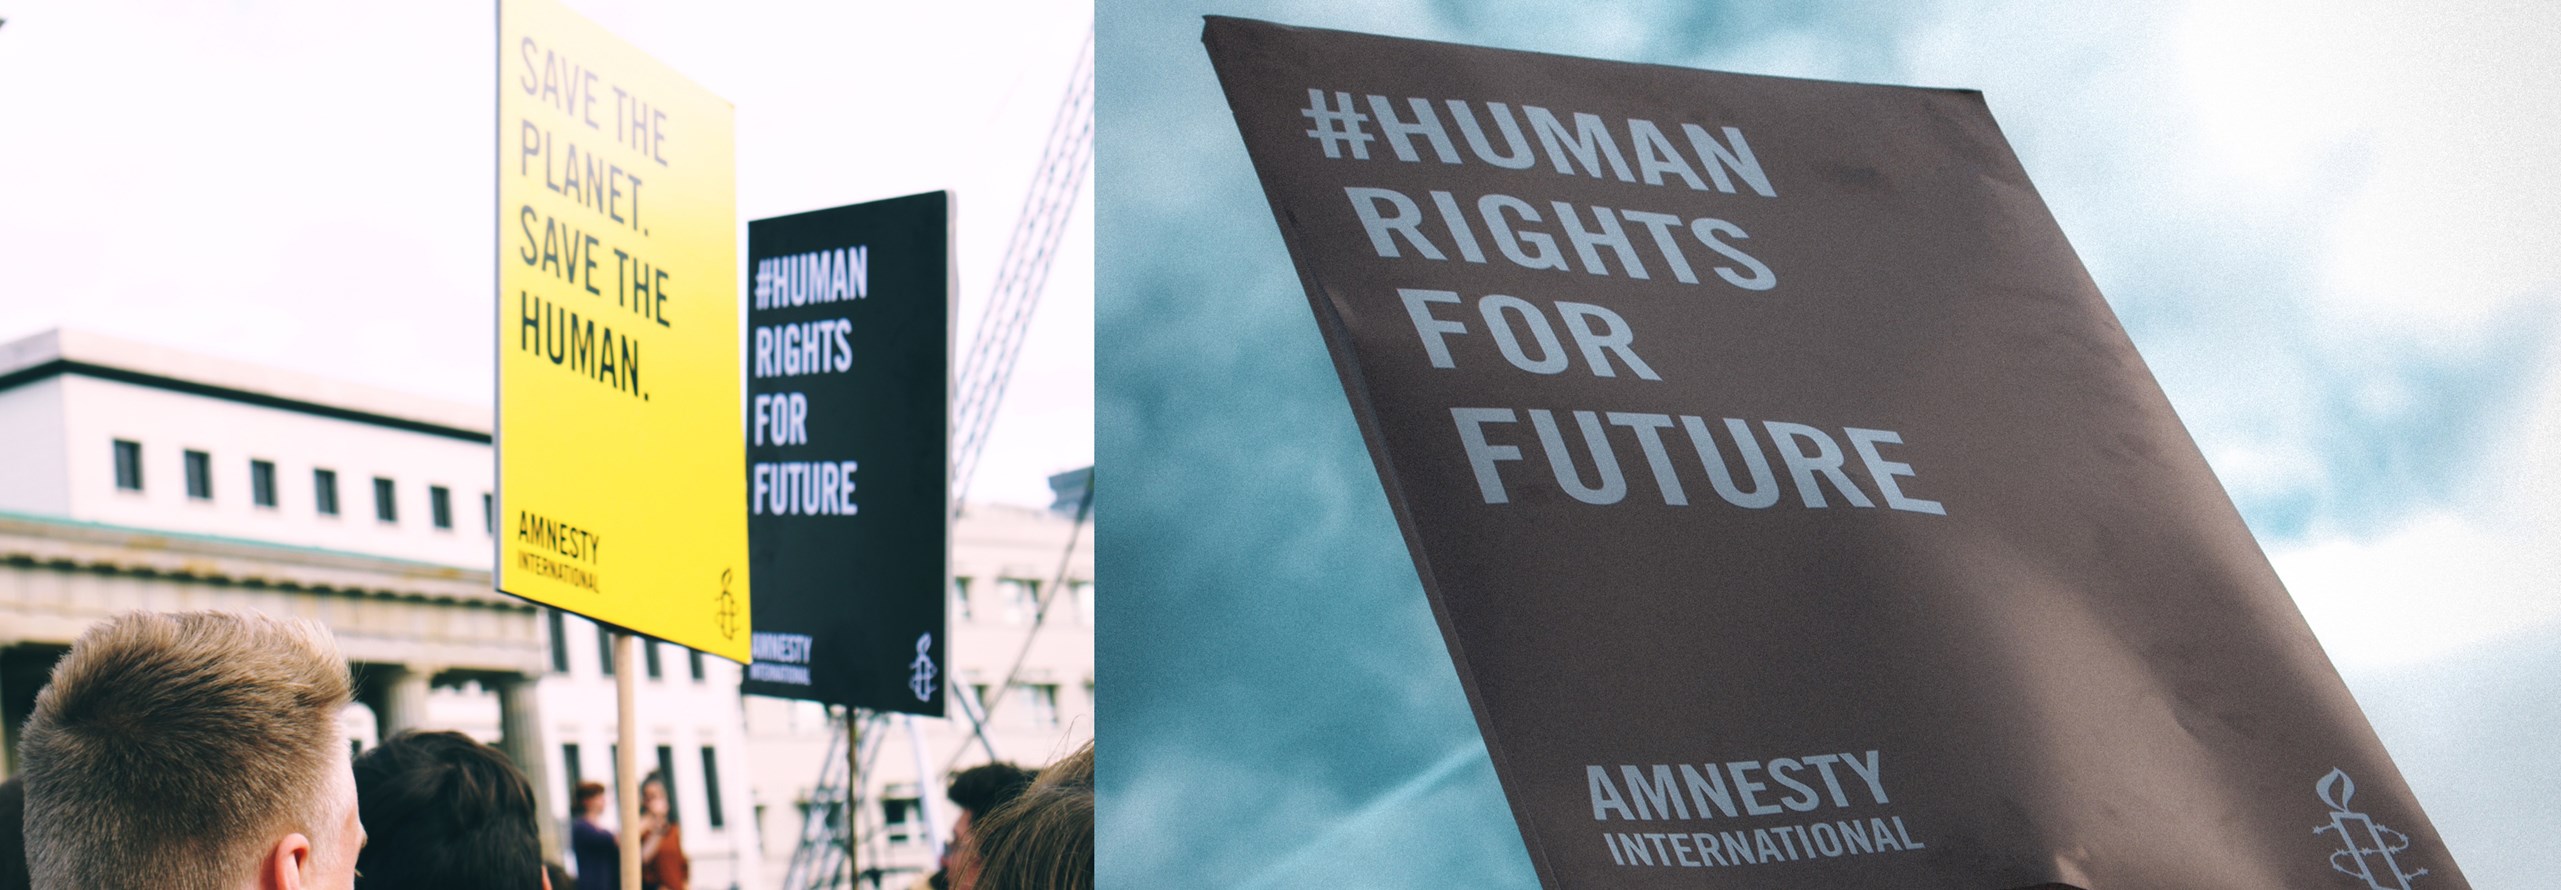 Human Rights For Future